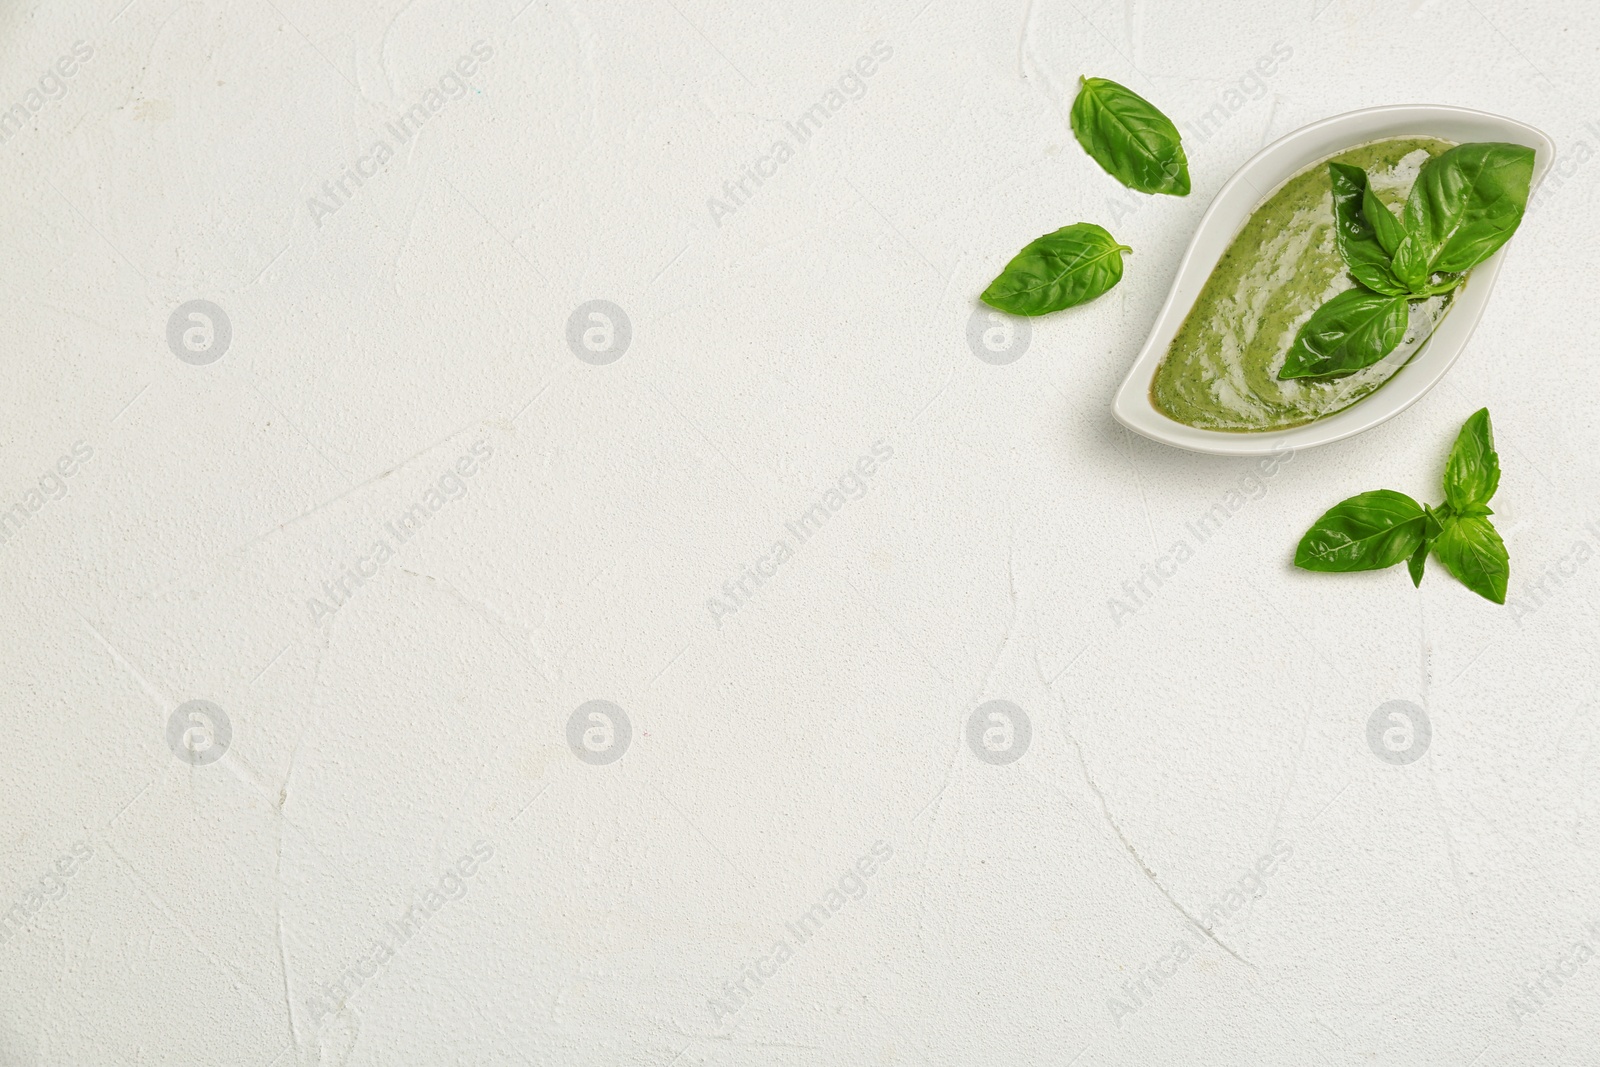 Photo of Sauce in gravy boat and basil leaves on white table, top view with space for text